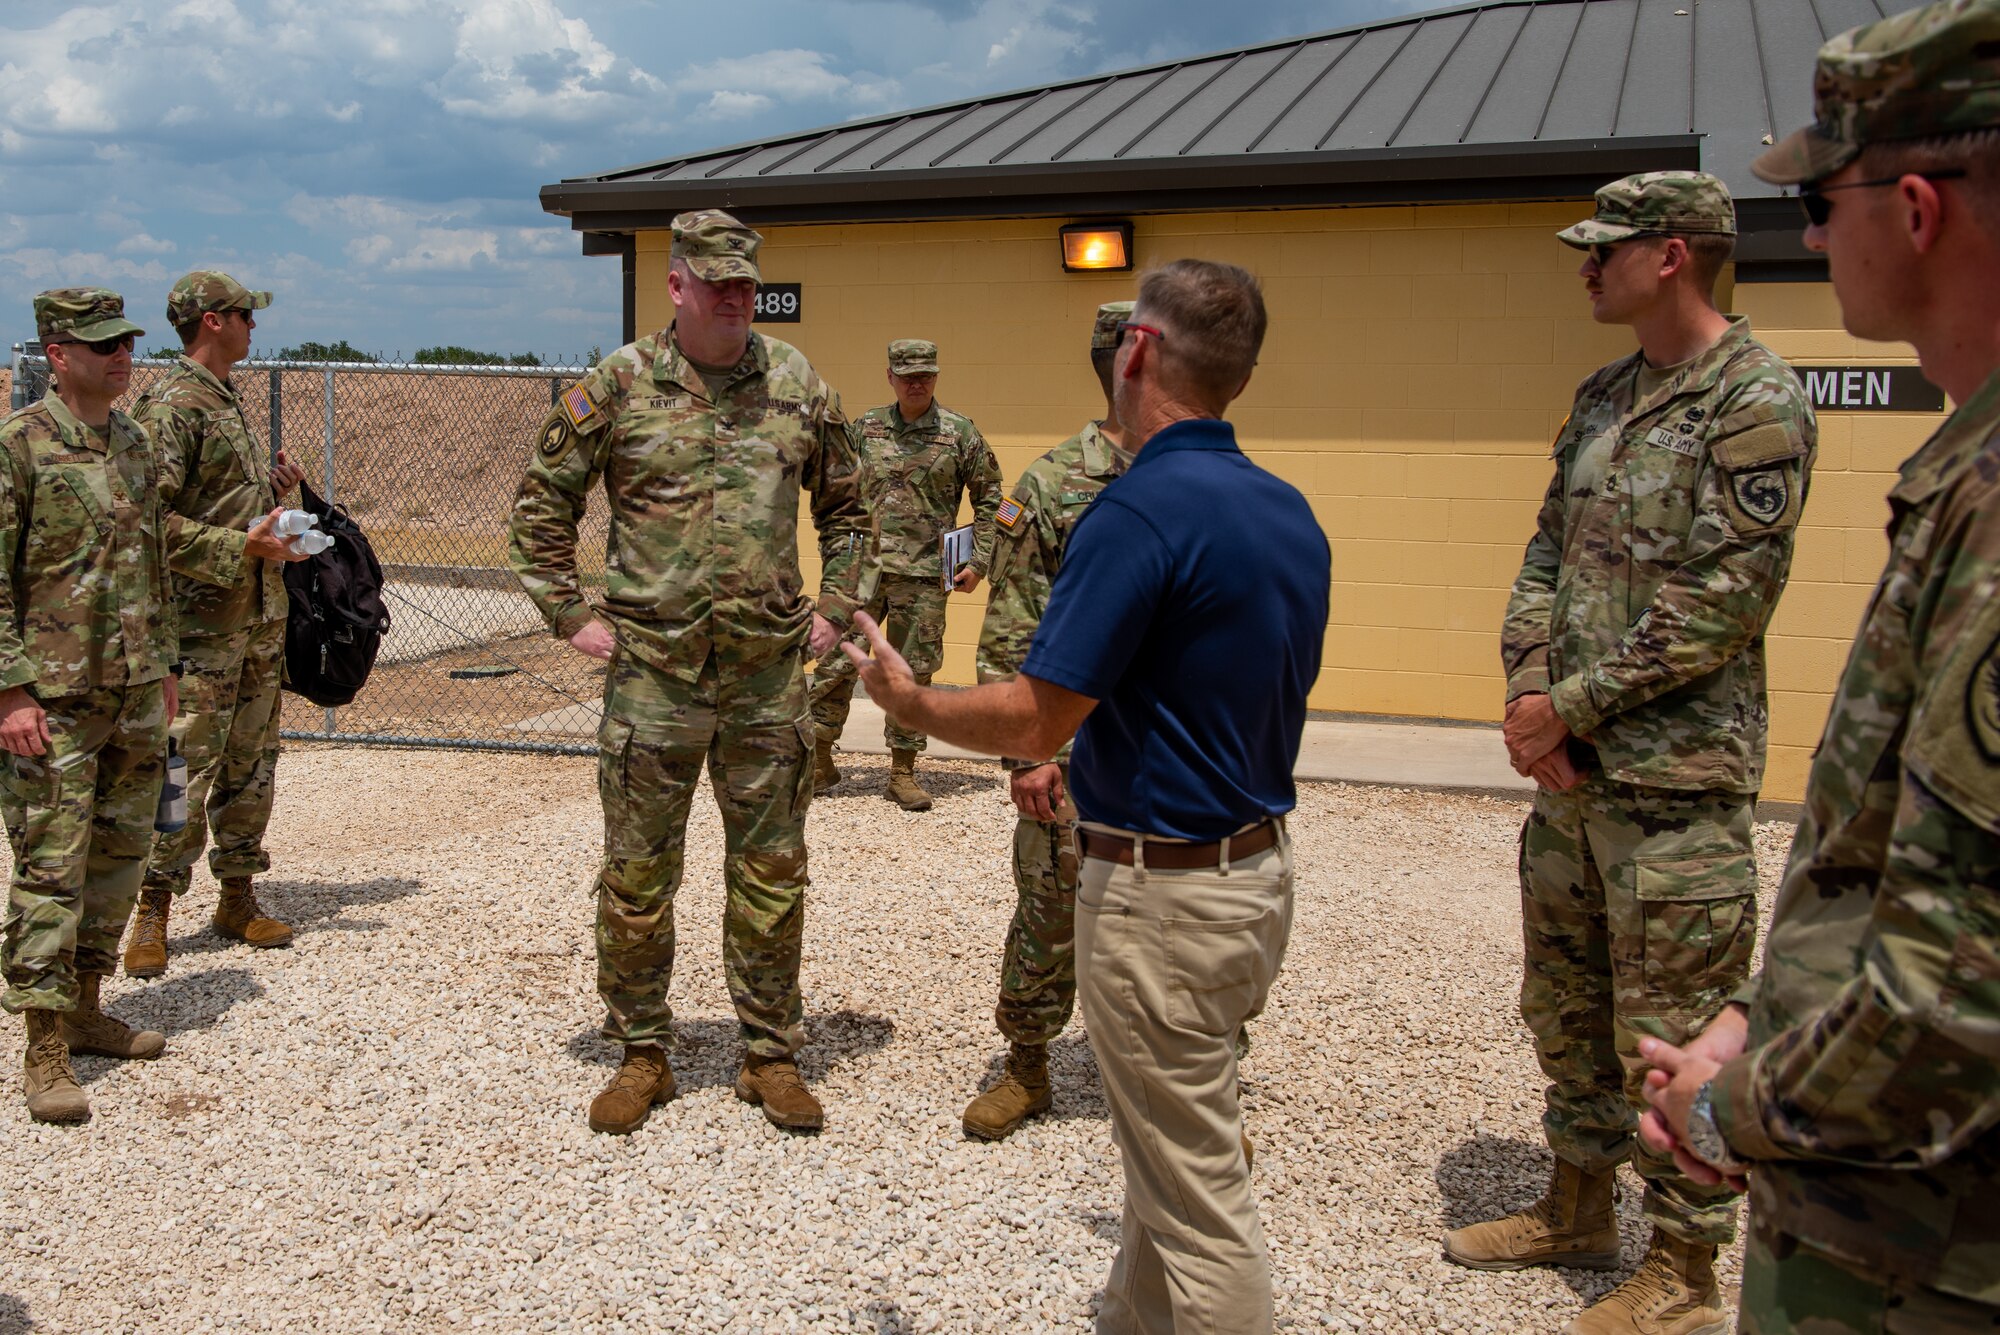 U.S. Army Col. James A. Kievit, Defense Language Institute Foreign Language Center commandant, receives a brief from members of the 344th Military Intelligence Battalion at Forward Operating Base Sentinel, Goodfellow Air Force Base, Texas, July 12, 2022. The 344th MI BN trains Soldiers to be intelligence and cyber professionals operating across the globe. (U.S. Air Force photo by Senior Airman Michael Bowman)